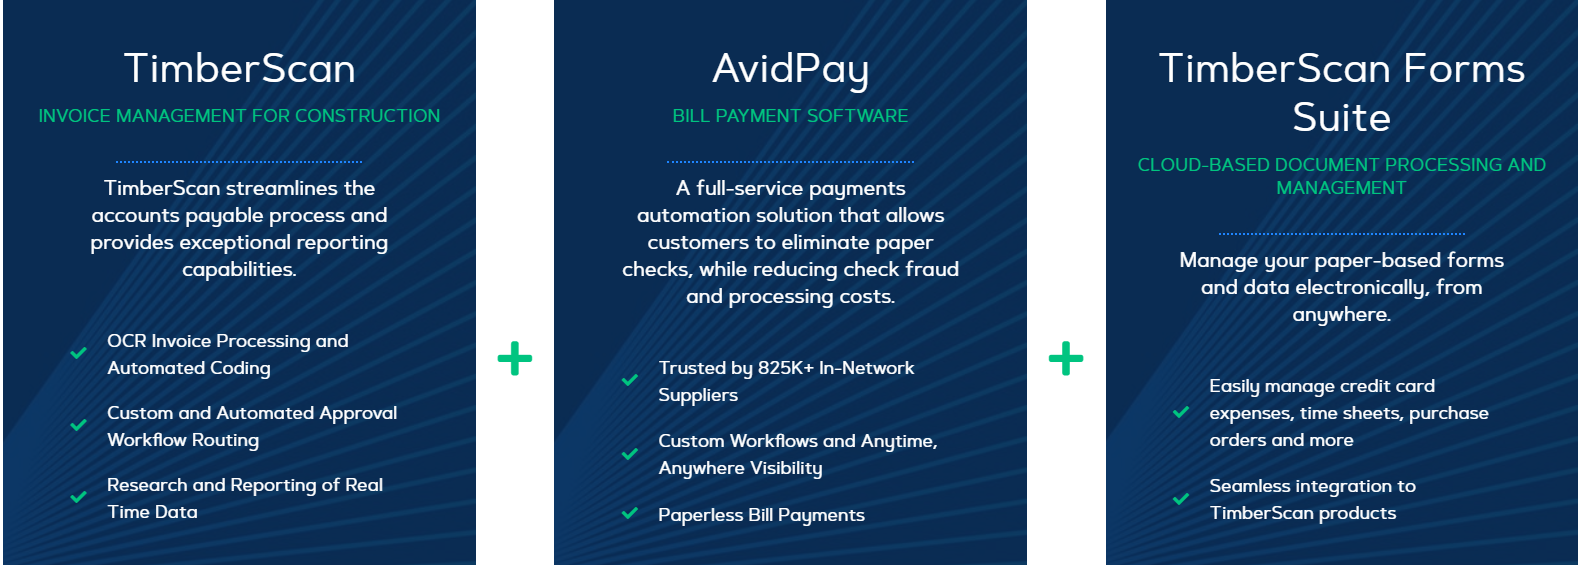 Accounts Payable Automation for Construction Establish a strong foundation for your accounts payable with an end-to-end purchase-to-pay solution made to eliminate manual processing.